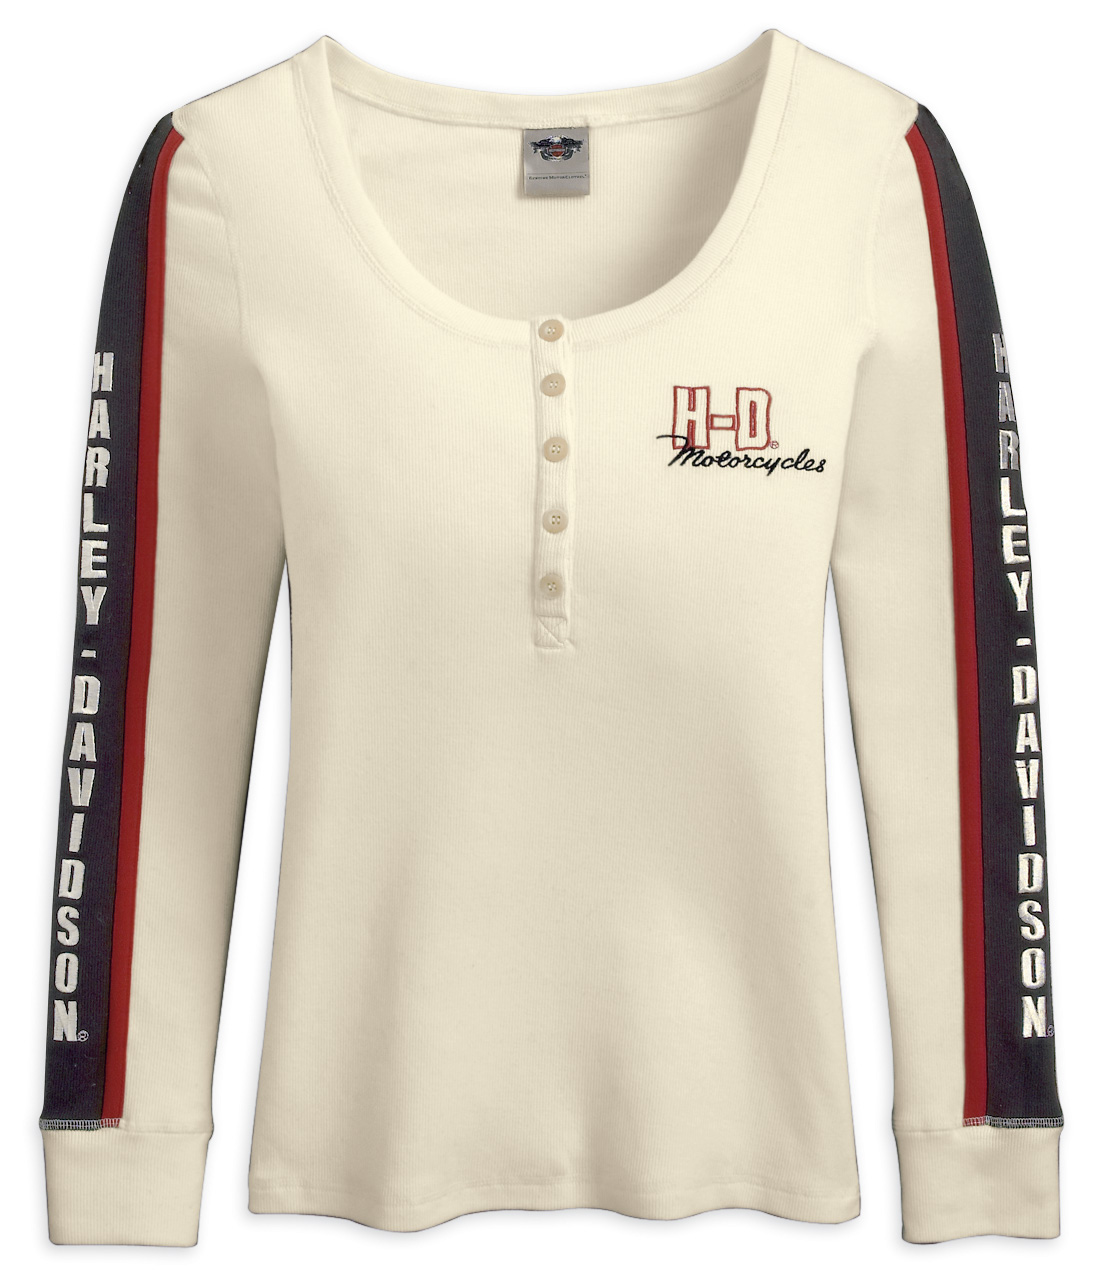 NEW WOMEN’S PERFORMANCE L/S HENLEY FROM HARLEY-DAVIDSON | Born To Ride ...